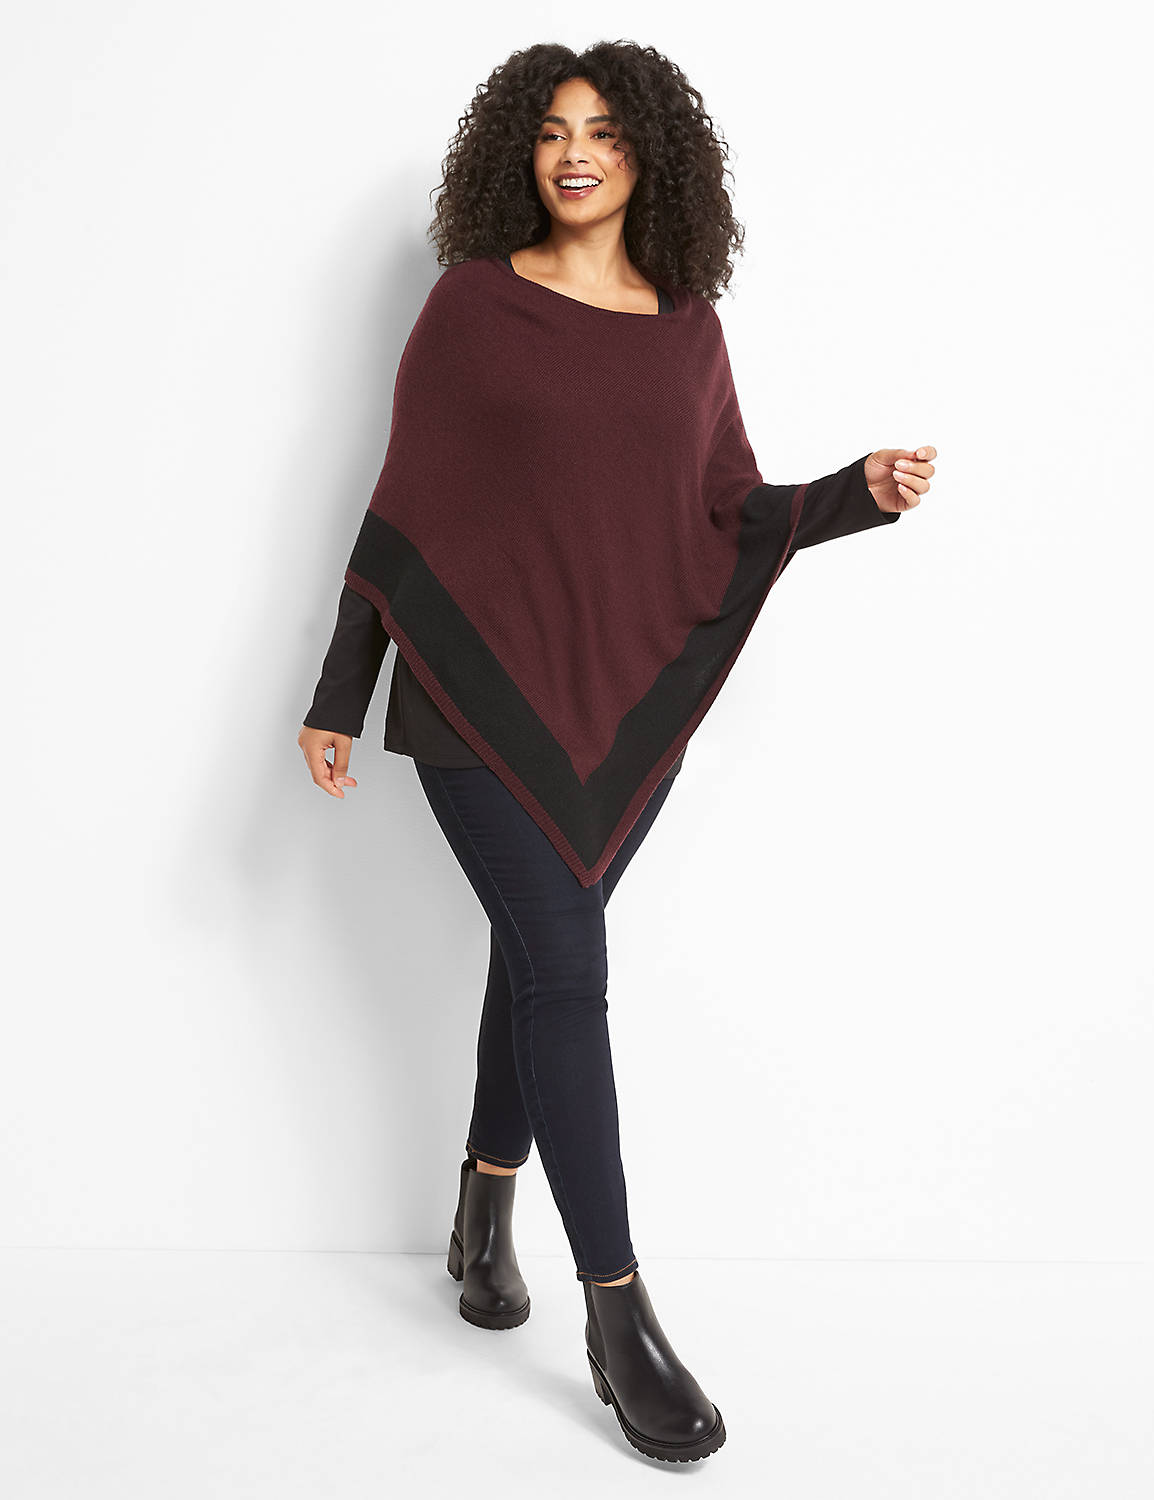 Colorblock Poncho Product Image 3